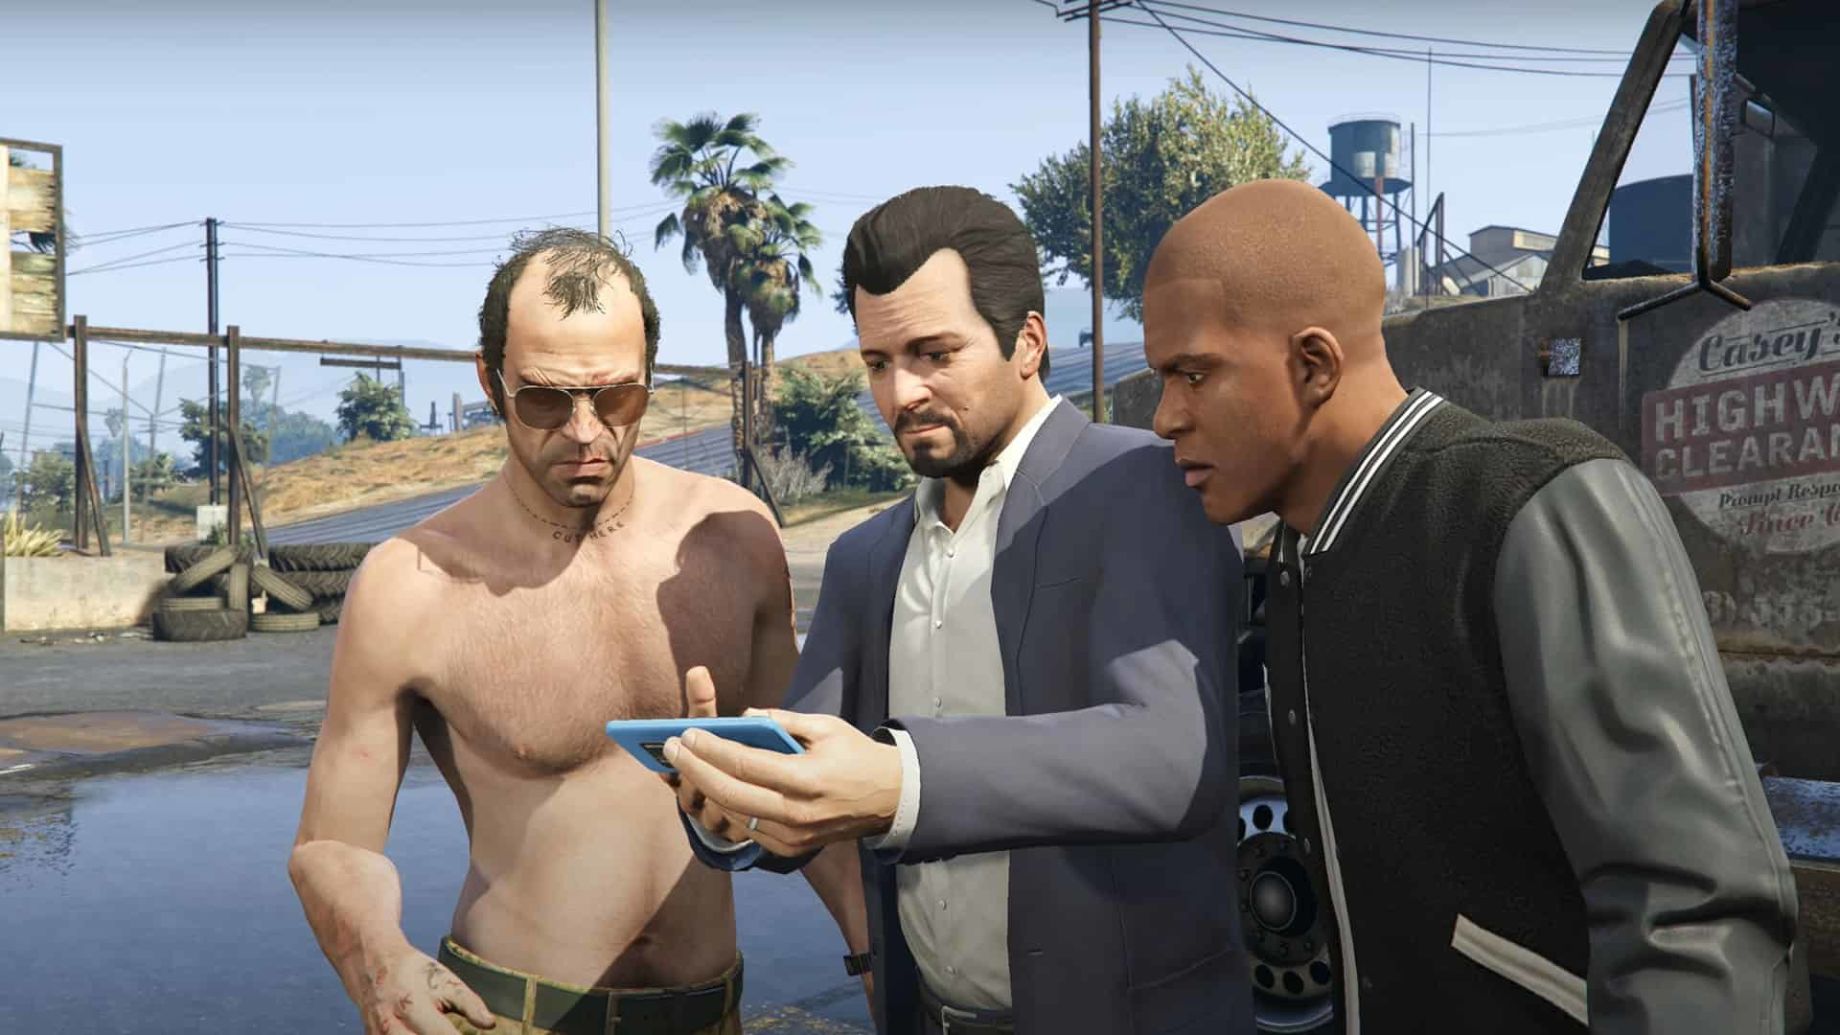 GTA 6 should be priced 'per hour' value, publisher says